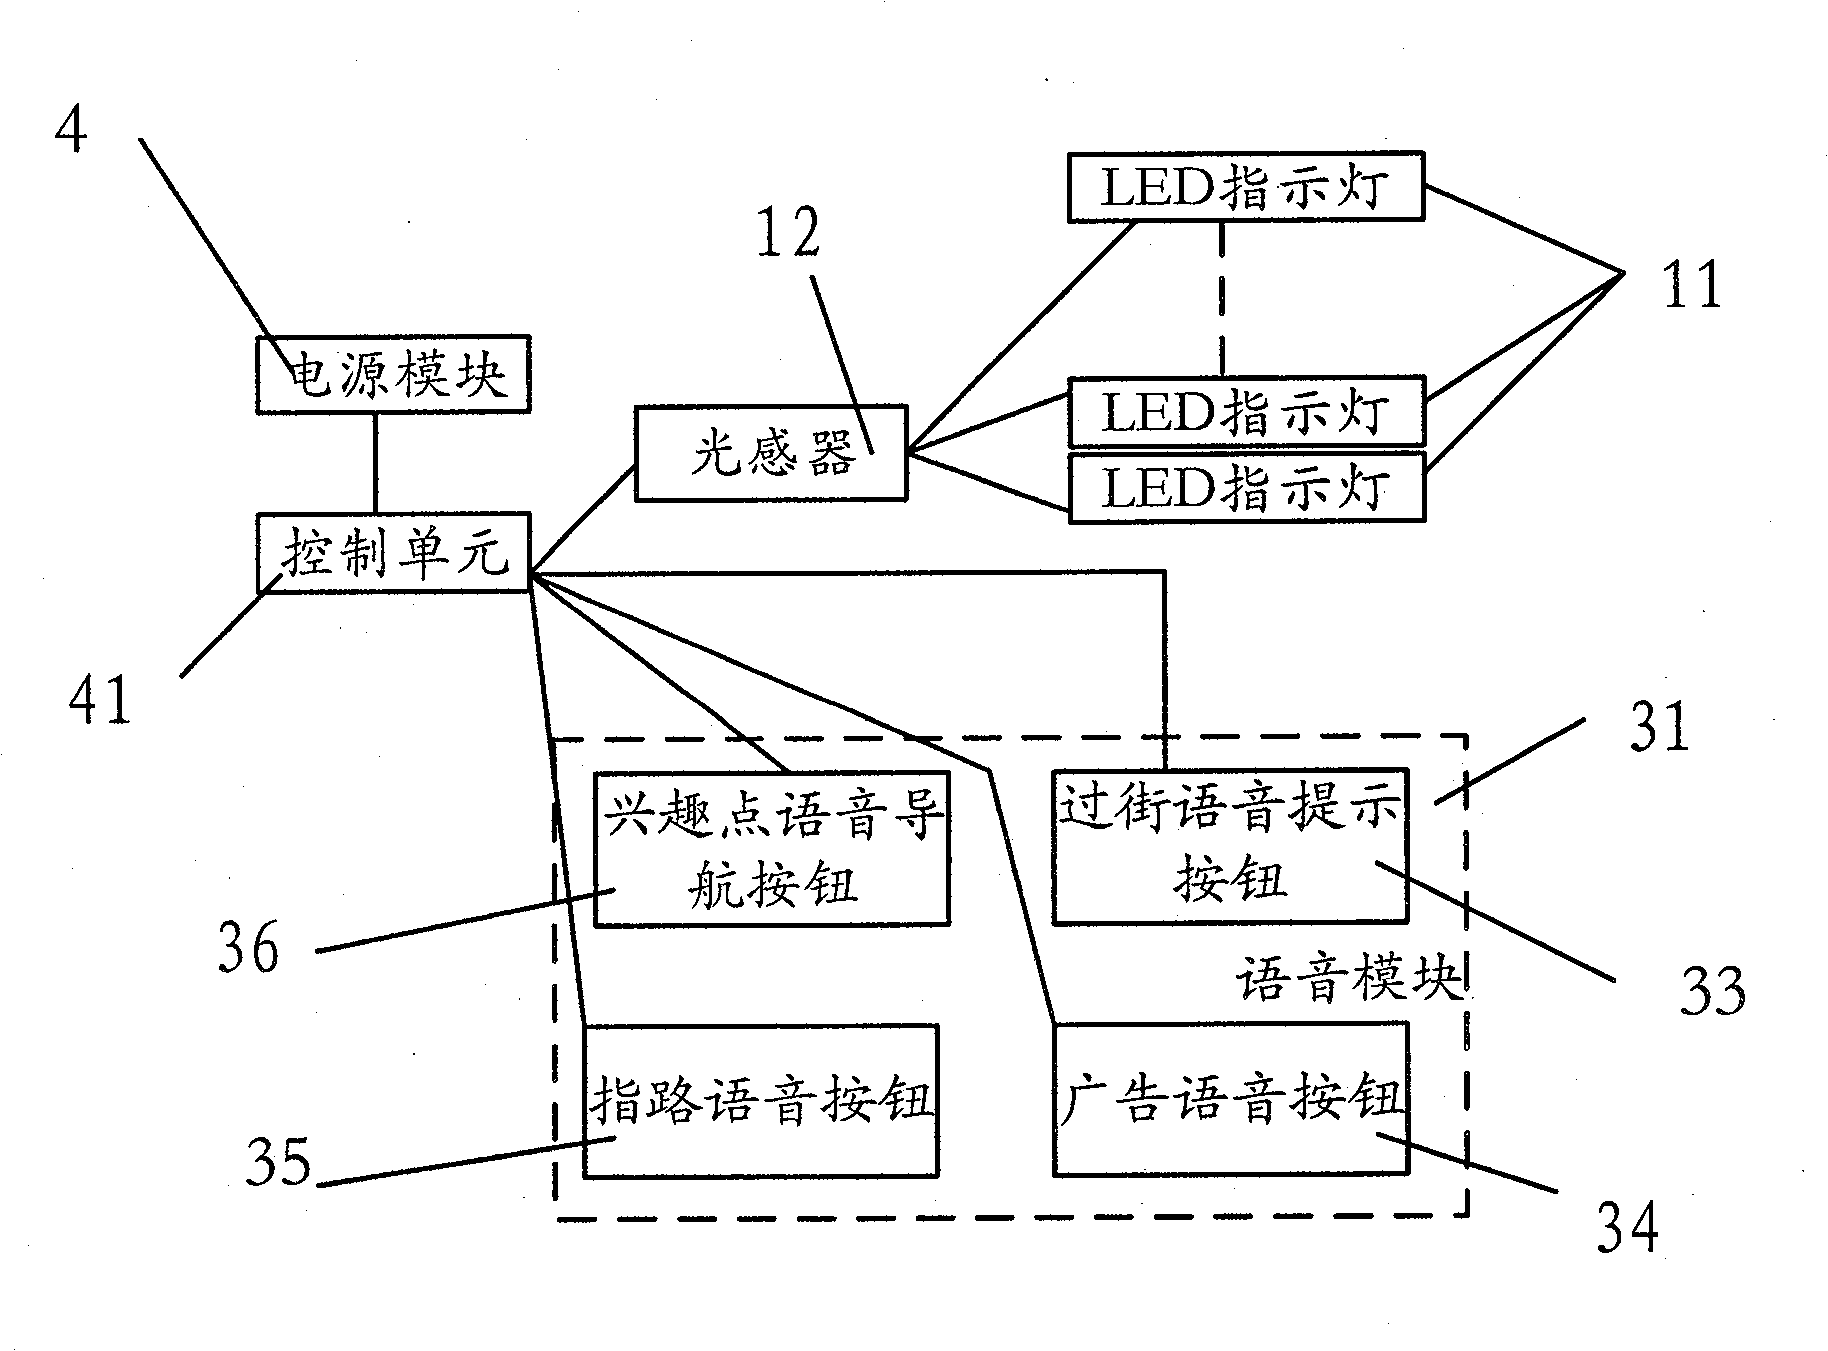 Road junction electronic navigation apparatus